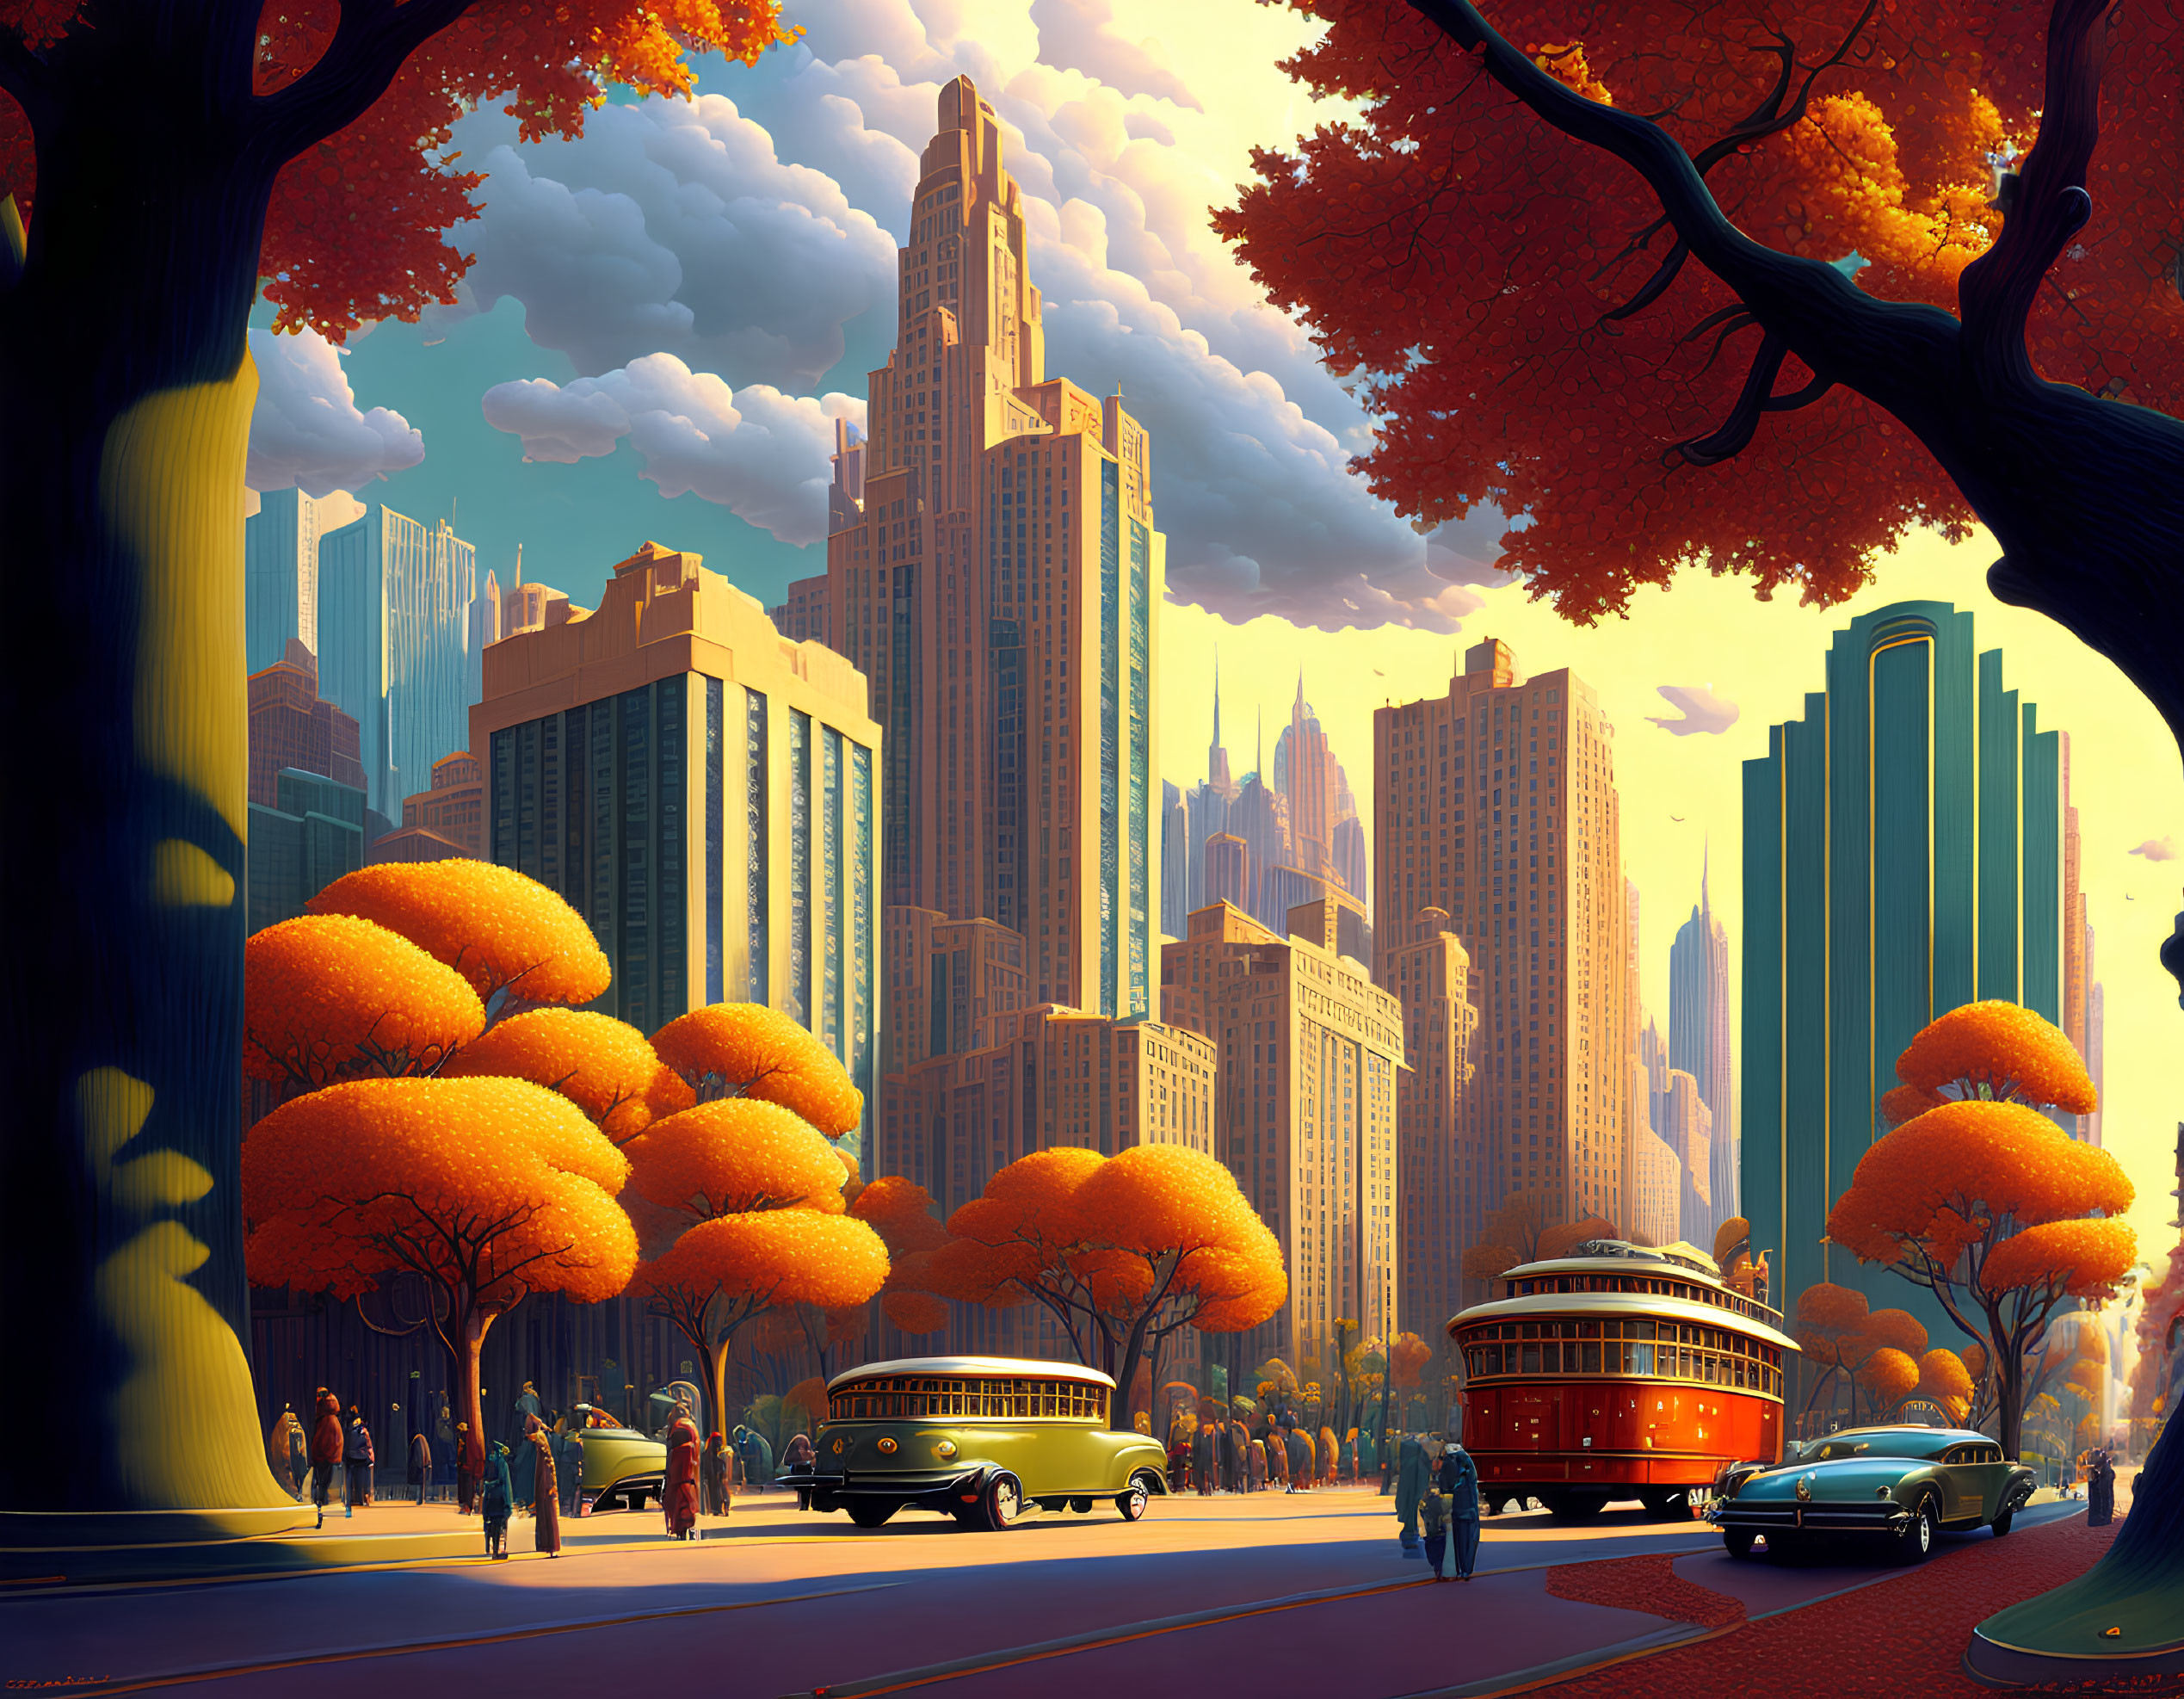 Autumn cityscape illustration with vintage cars, tram, people, orange trees, skyscrapers